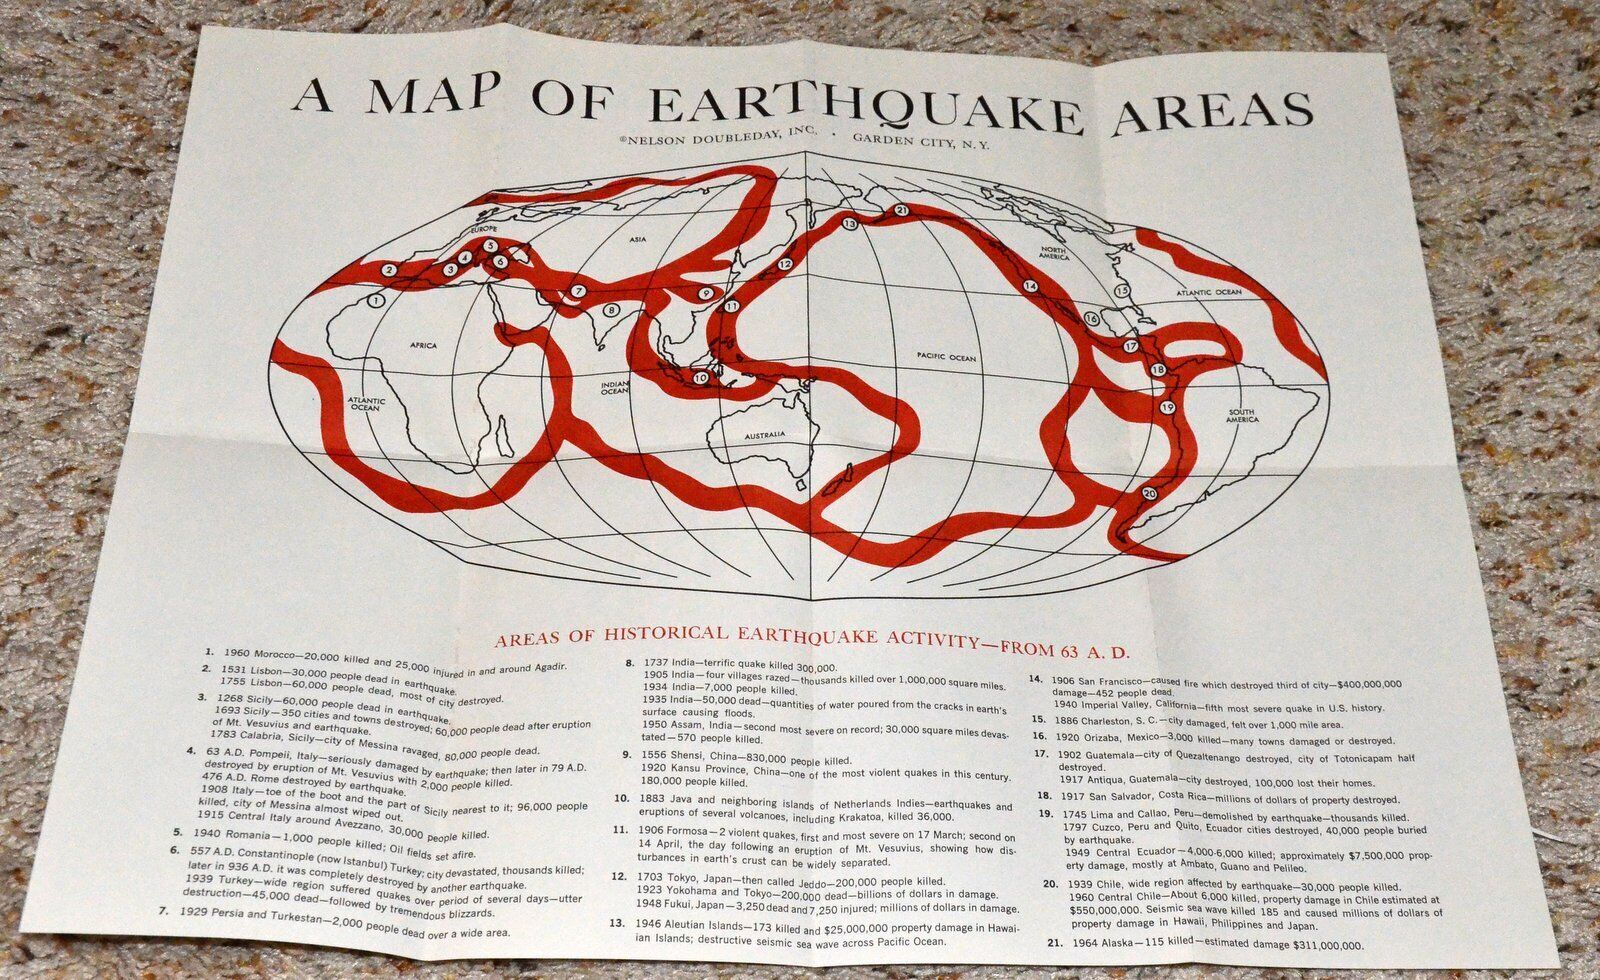 WORLD EARTHQUAKE AREAS 1965 MINT NEVER USED MAP & CHRONOLOGY AD 63 to 1964